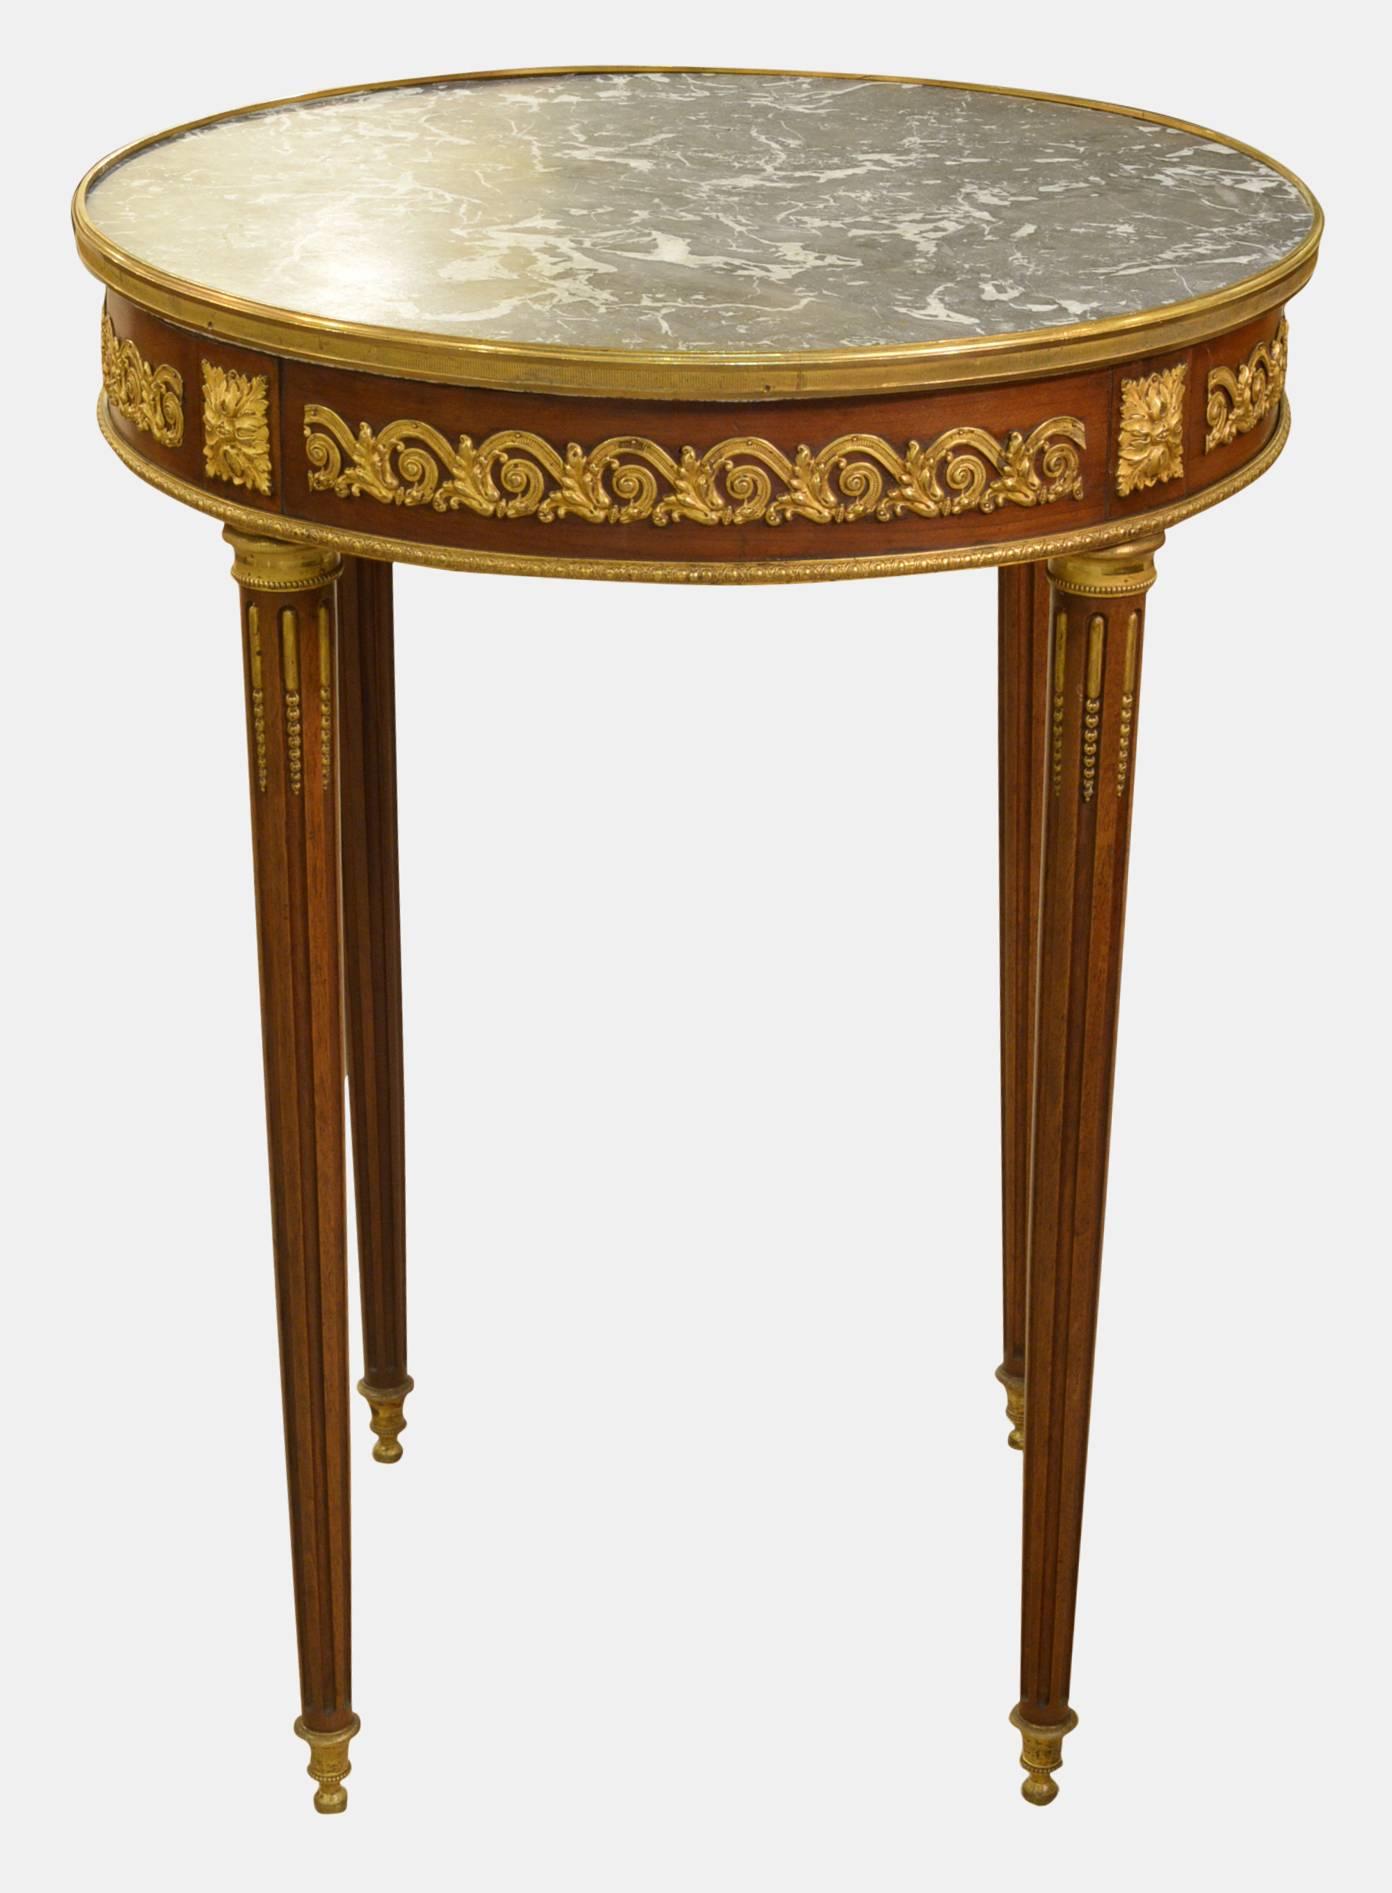 A Louis XVI style circular marble-topped Gueridon table with ormolu mounts to the fluted legs,

circa 1900.
Measures:
71.5cm (28.1